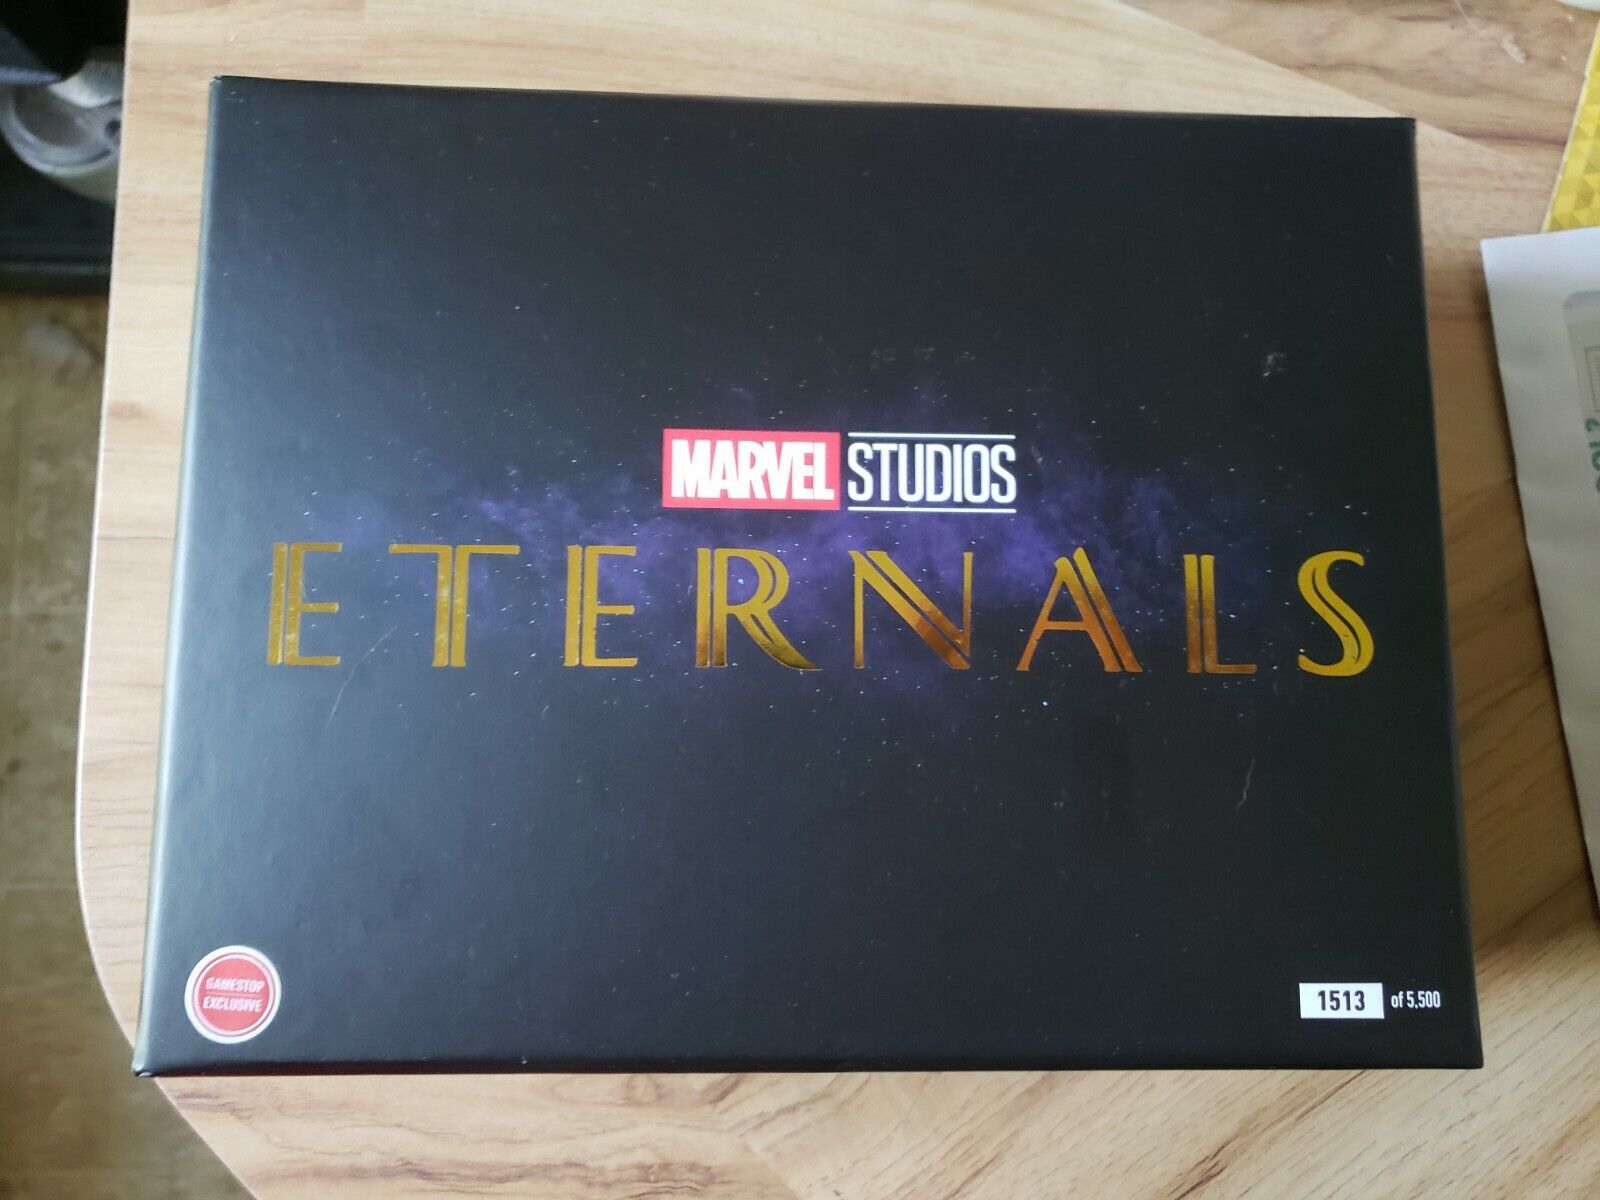 Marvel Studios The Eternals Gamestop Excl. Jewelry Box Set. Limited to 5500